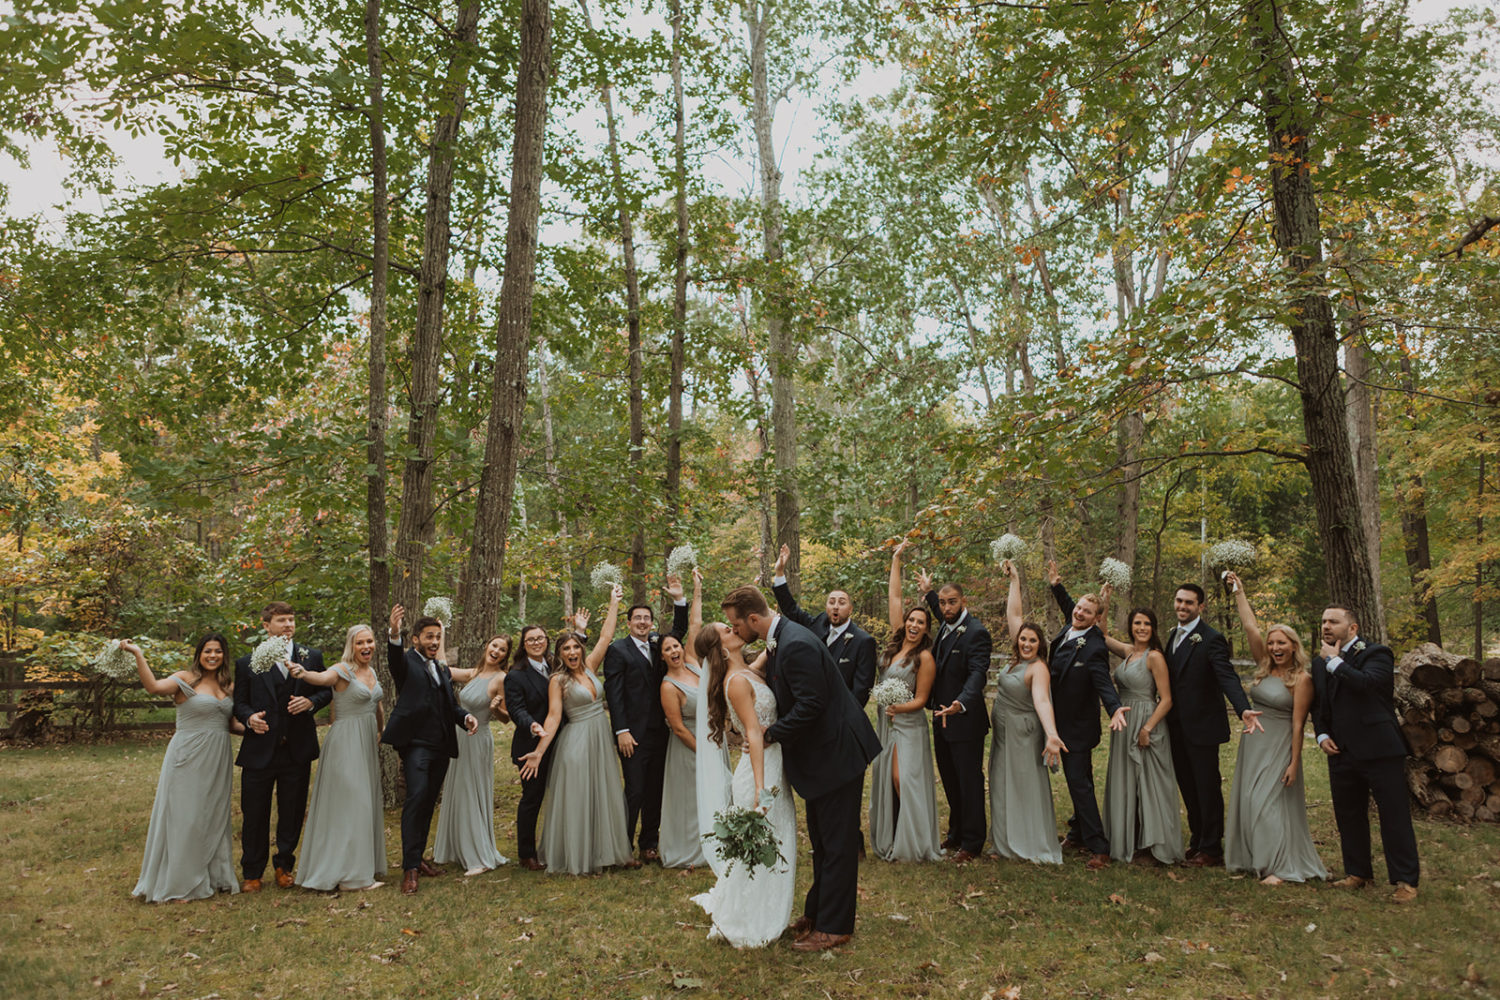 Couple kisses in front of cheering wedding party at backyard wedding